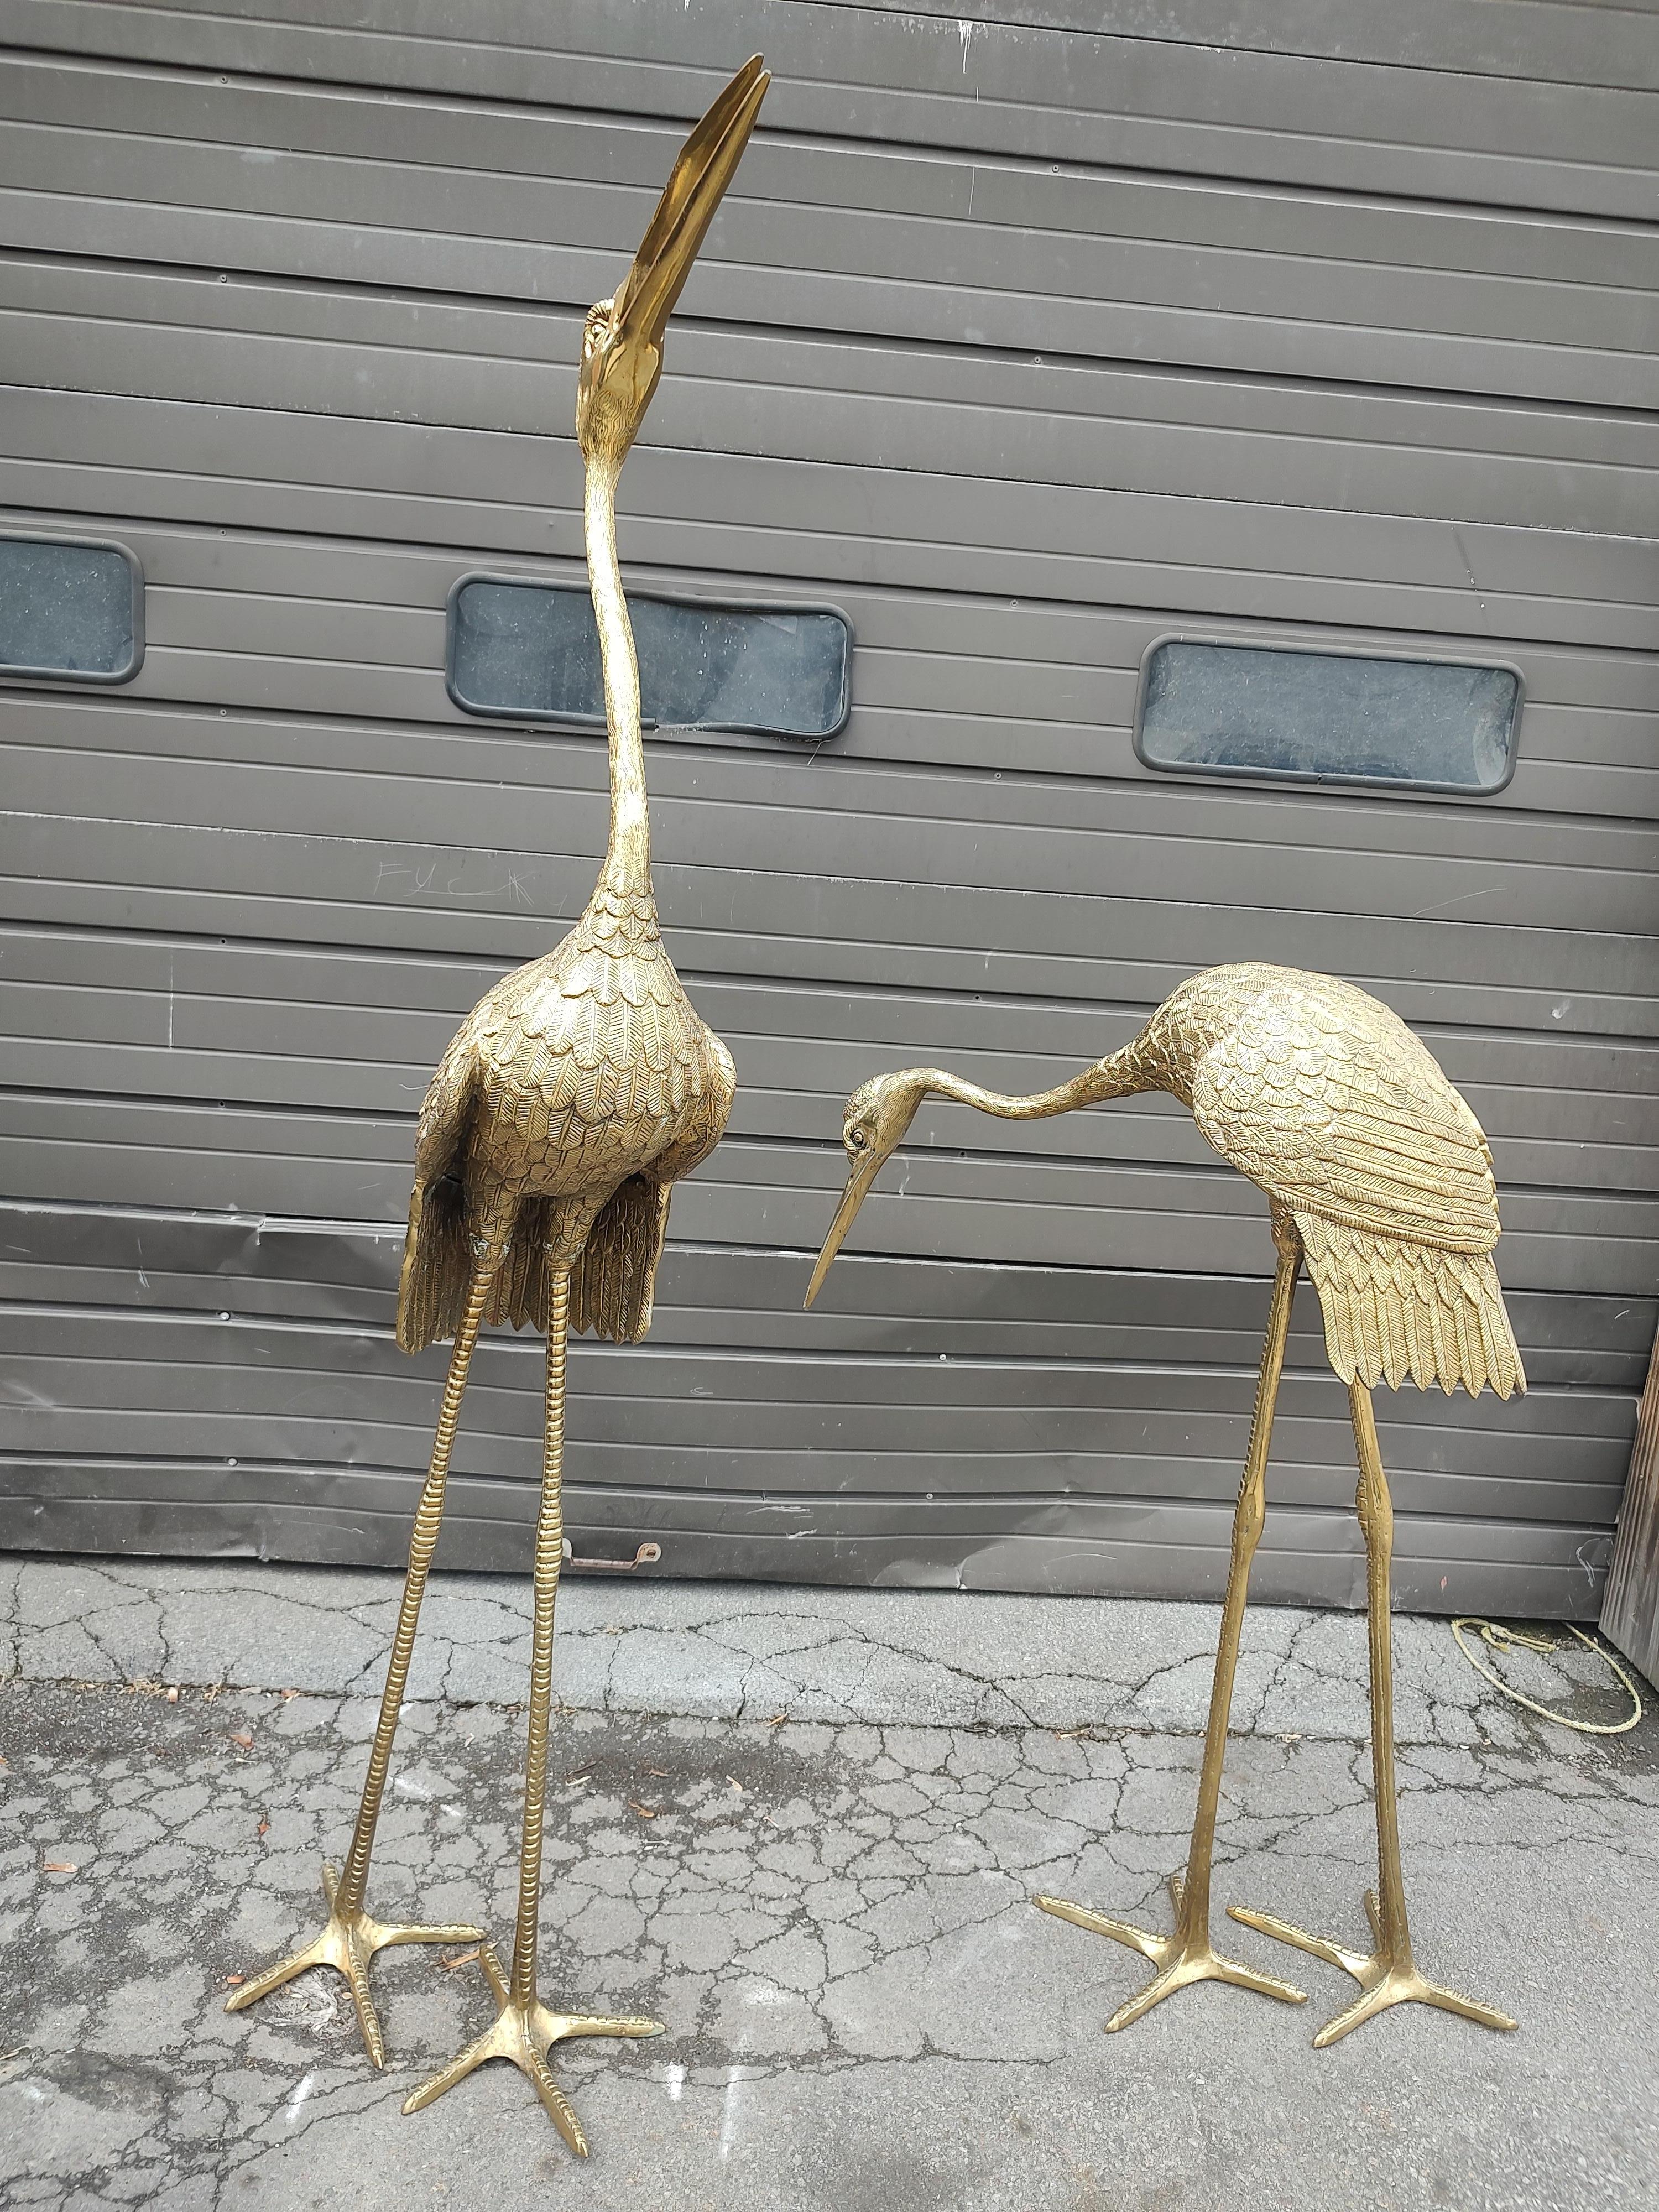 Spectacular pair of large Mid Century Modern Hollywood Regency brass egrets / cranes. Tall bird is 80 inches high, smaller bird is 50h x 38d x 11w
In amazing polished condition as these were kept inside the home. Will make a fabulous addition to the